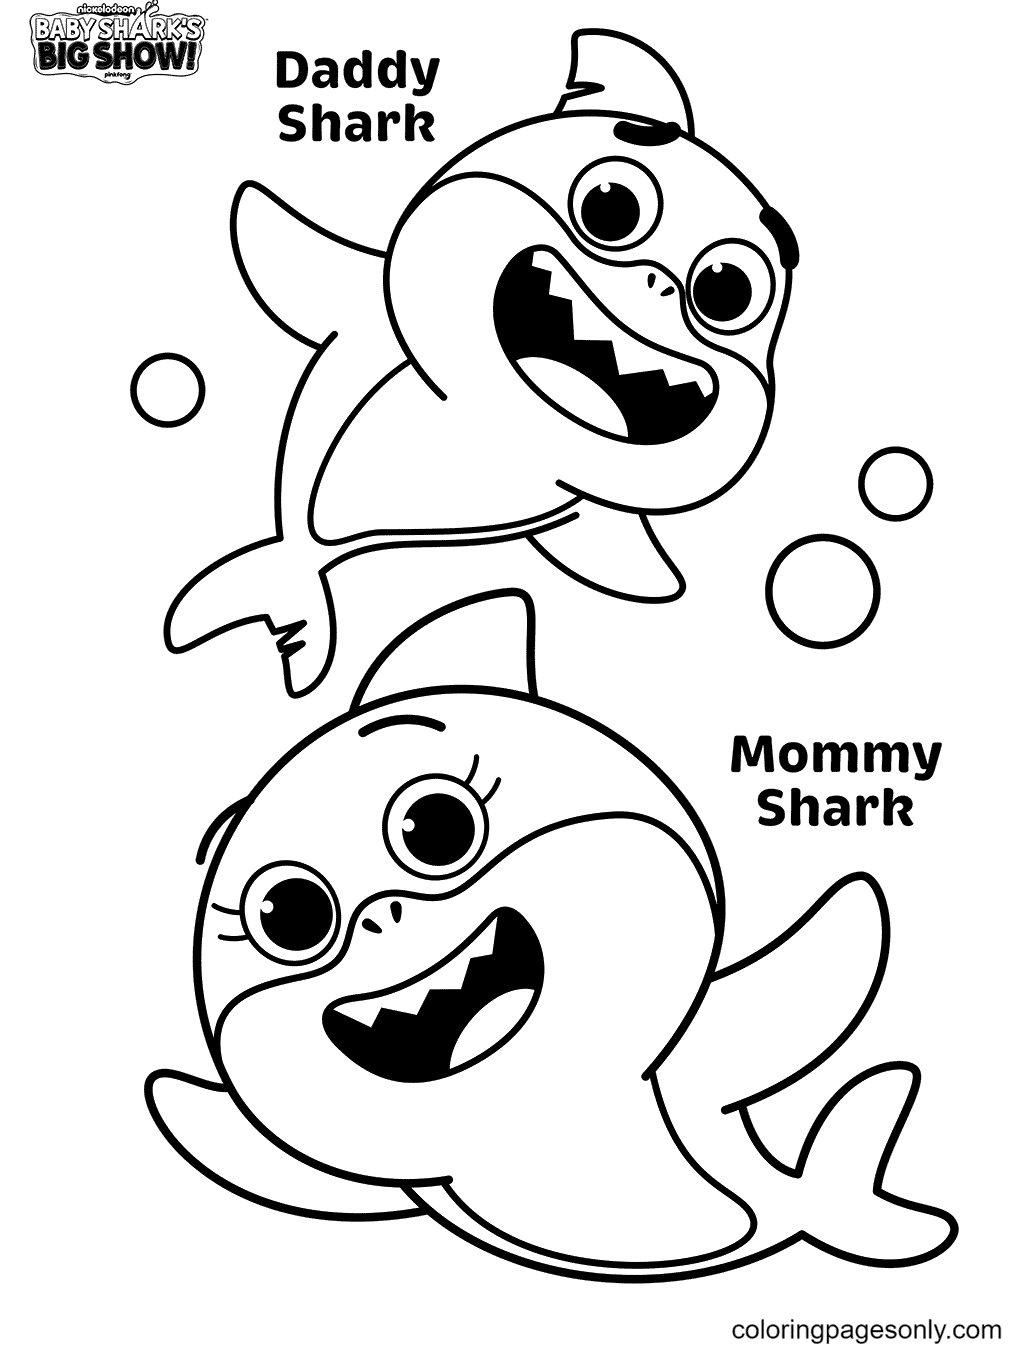 Daddy Shark and Mommy Shark Coloring Page